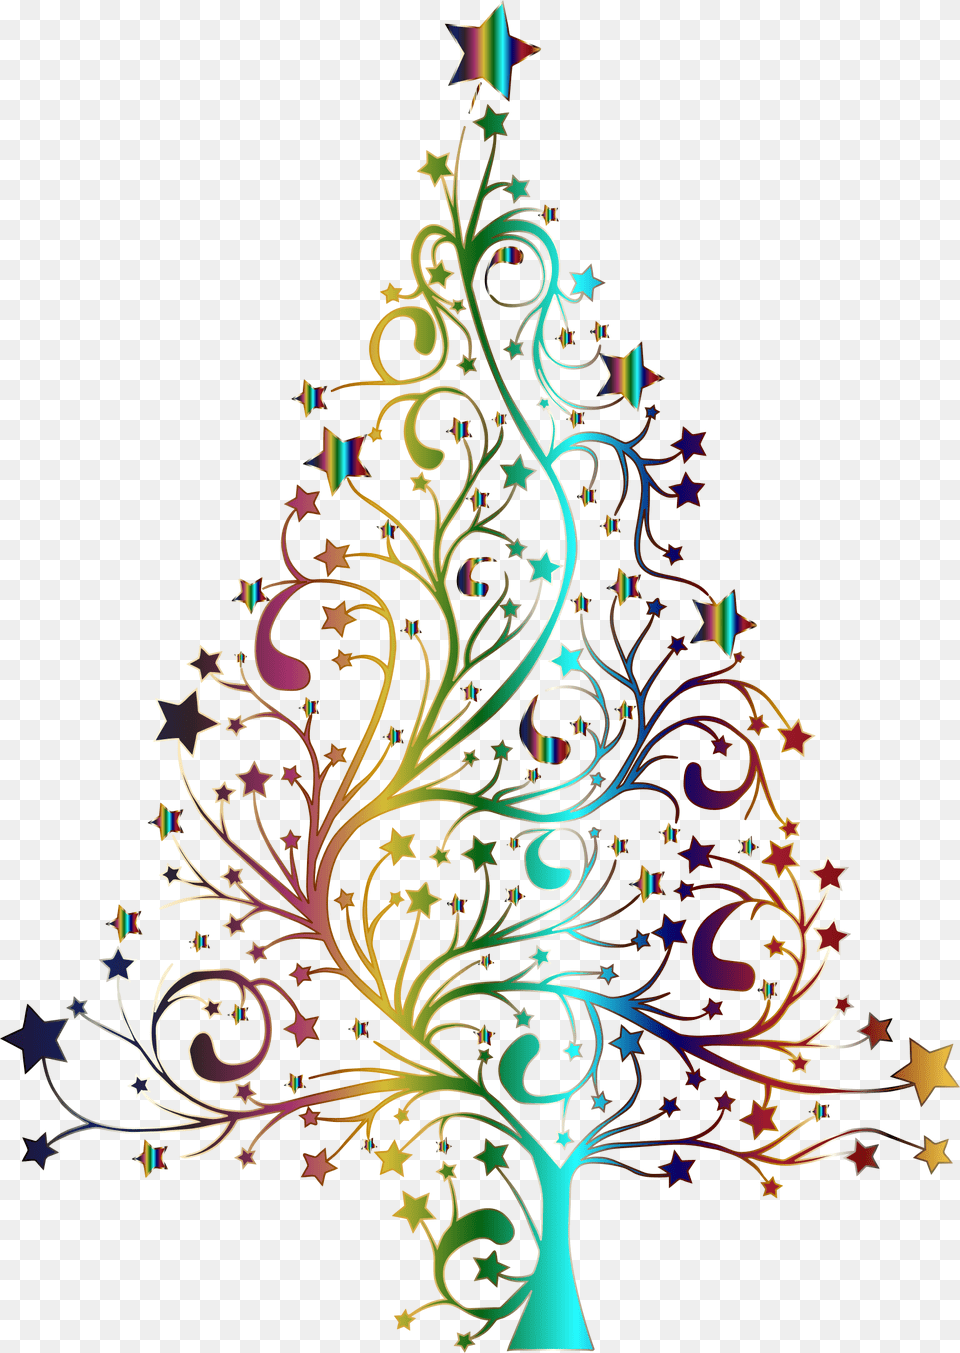 Starry Christmas Tree Prismatic No Background Clip Christmas Images No Background, Art, Graphics, Floral Design, Pattern Free Png Download